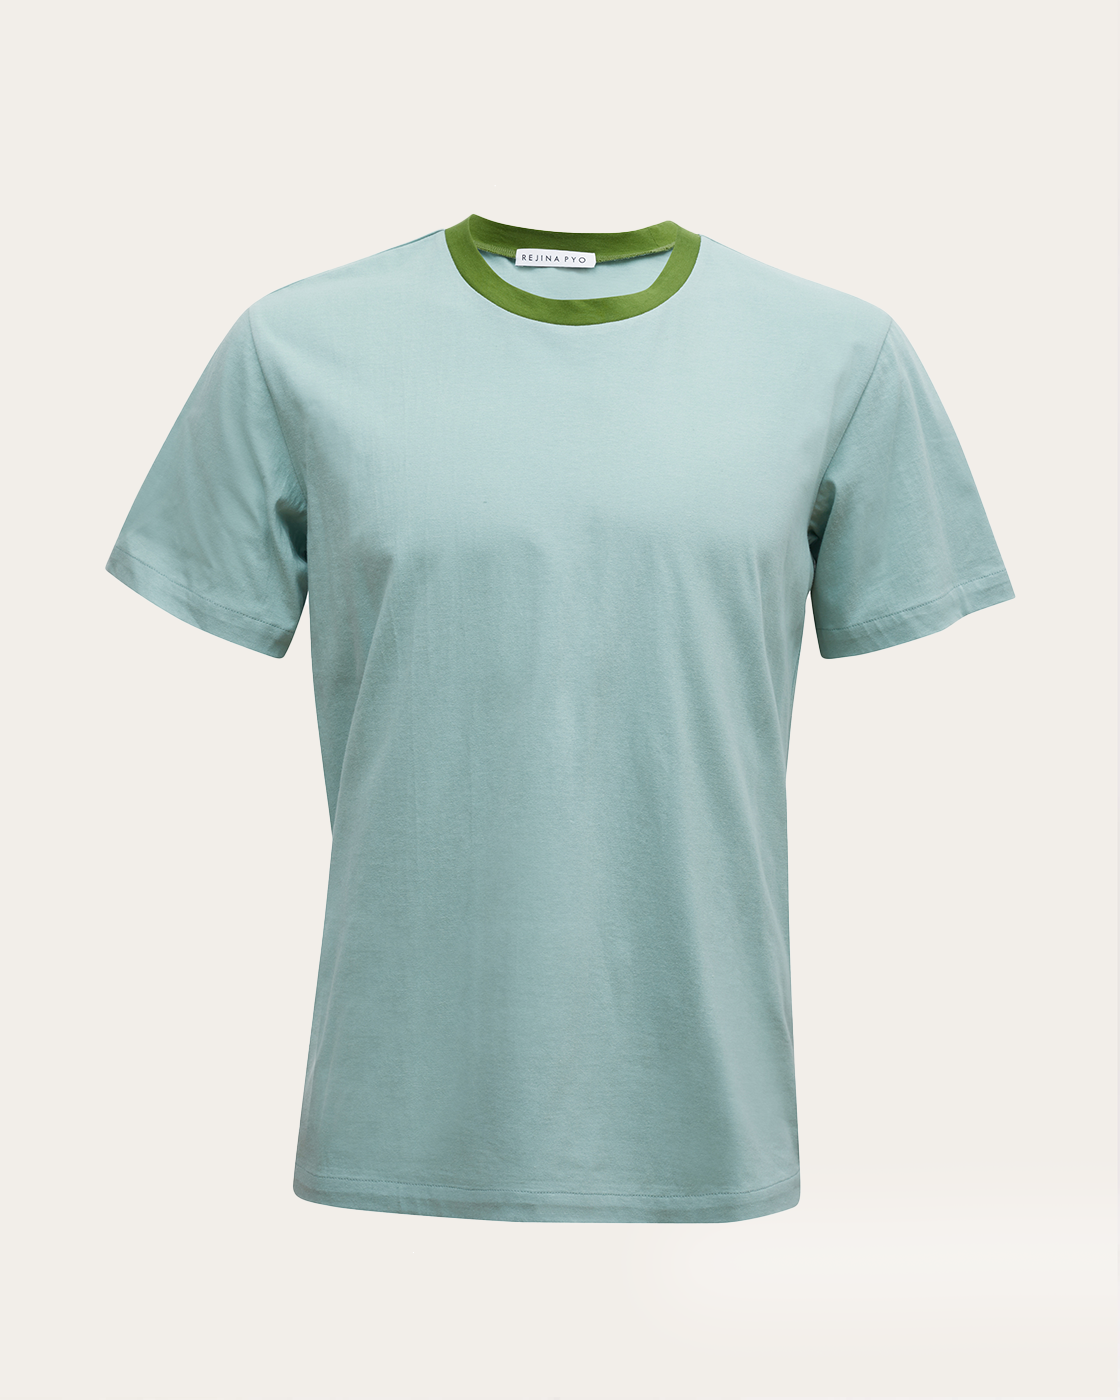 Rhys T-shirt Cotton Jersey Mint Blue + Green - Special Price